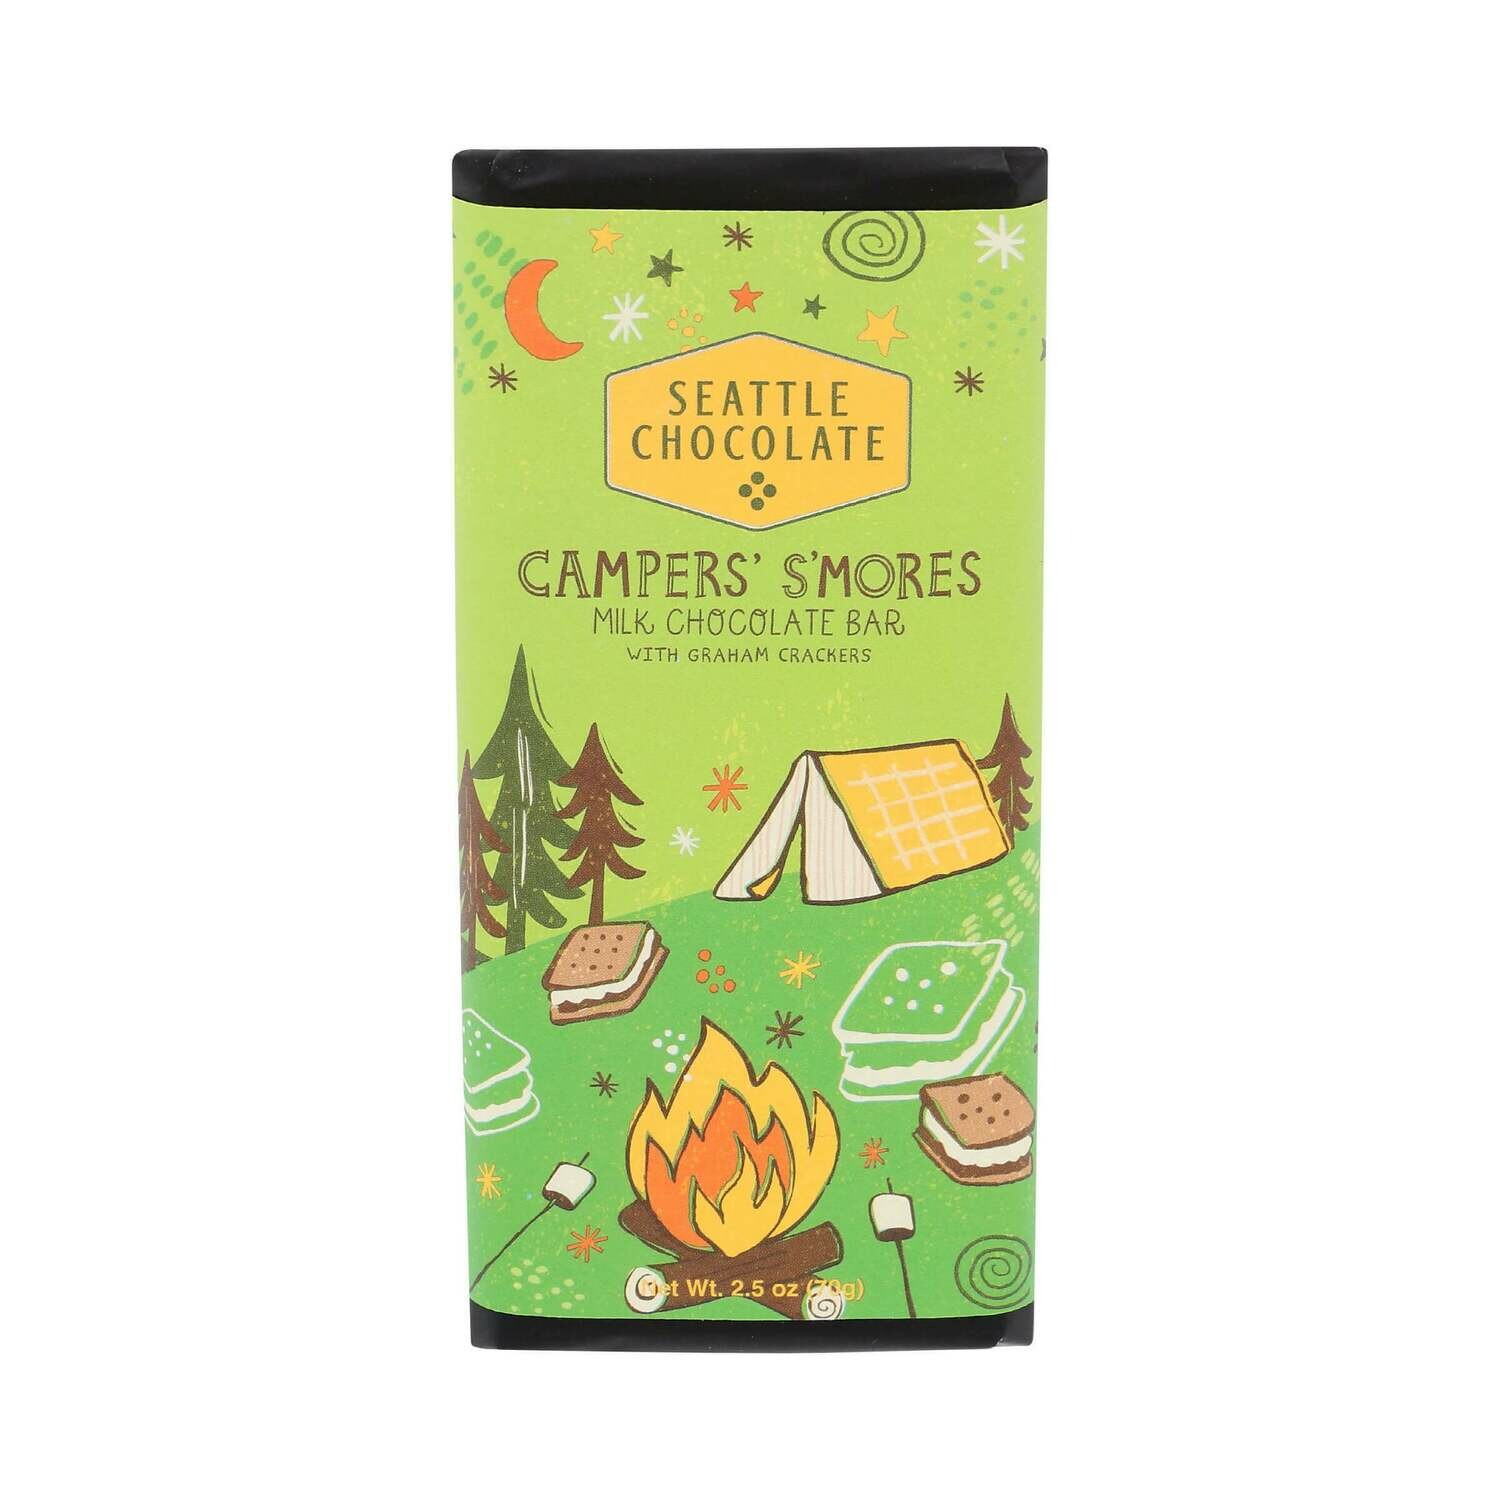 Campers Smores Seattle Chocolate Bar